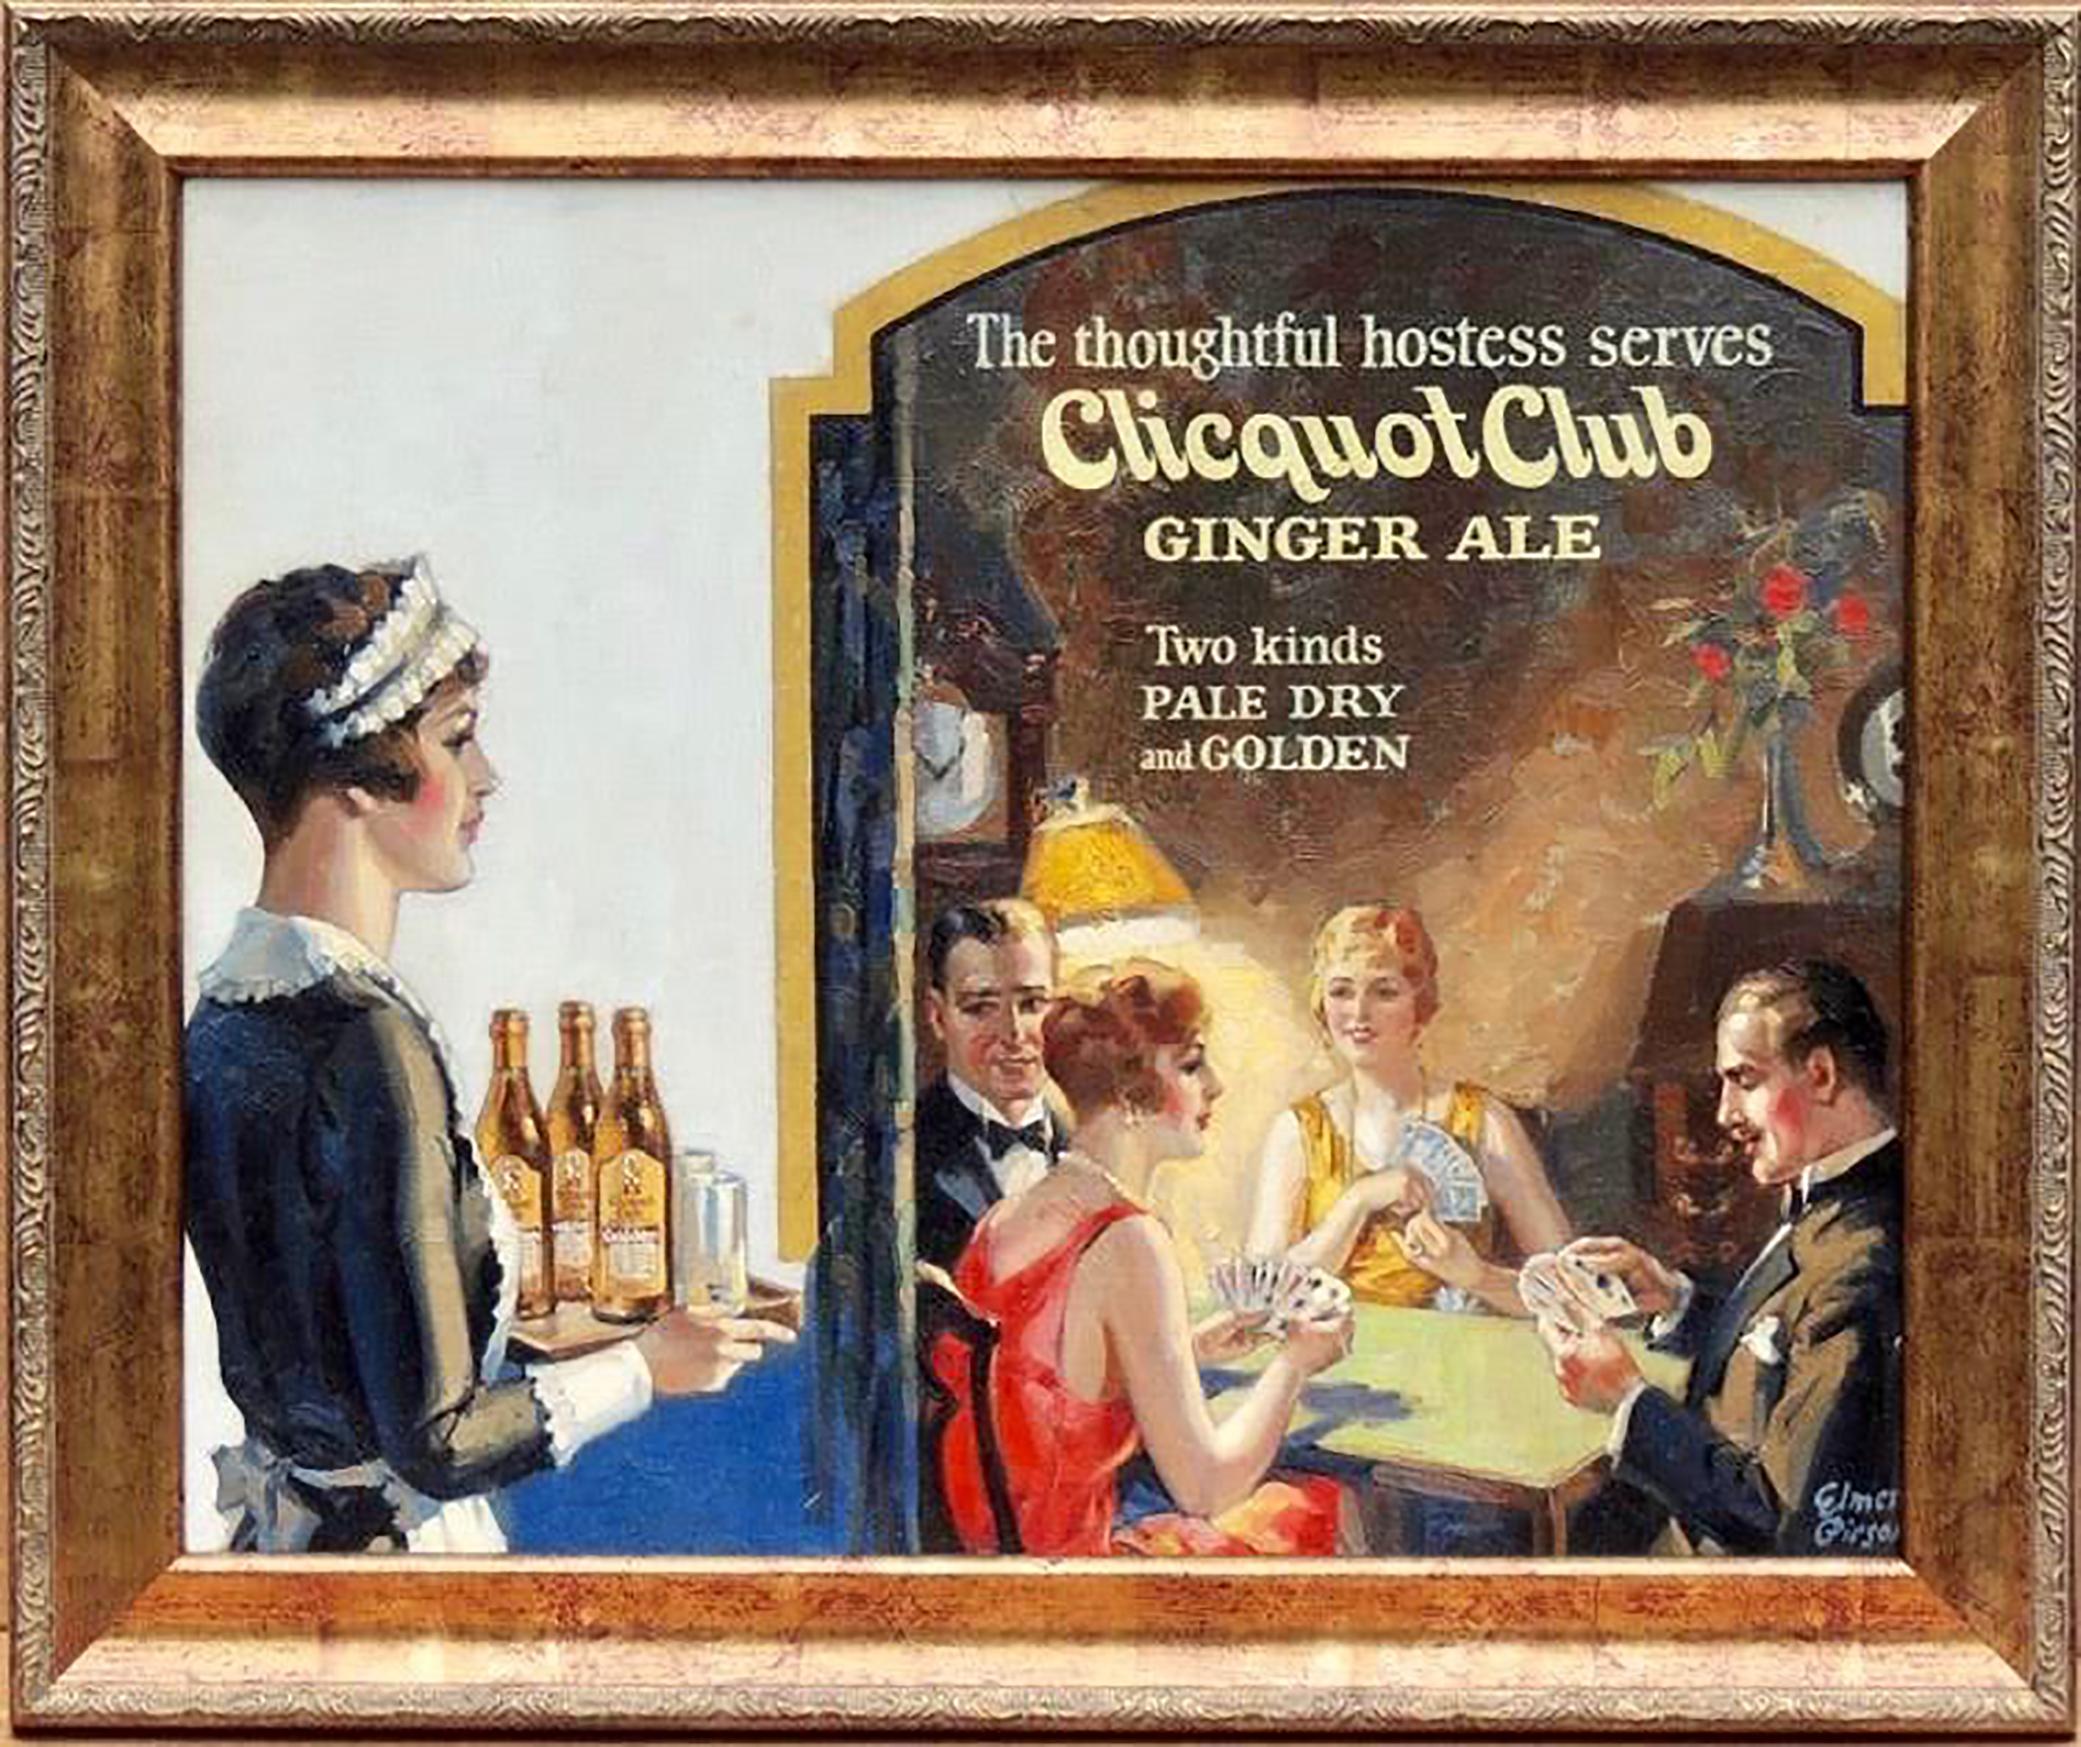 Clicquot Club Ginger Ale Advertisement - Painting by Elmer Pirson